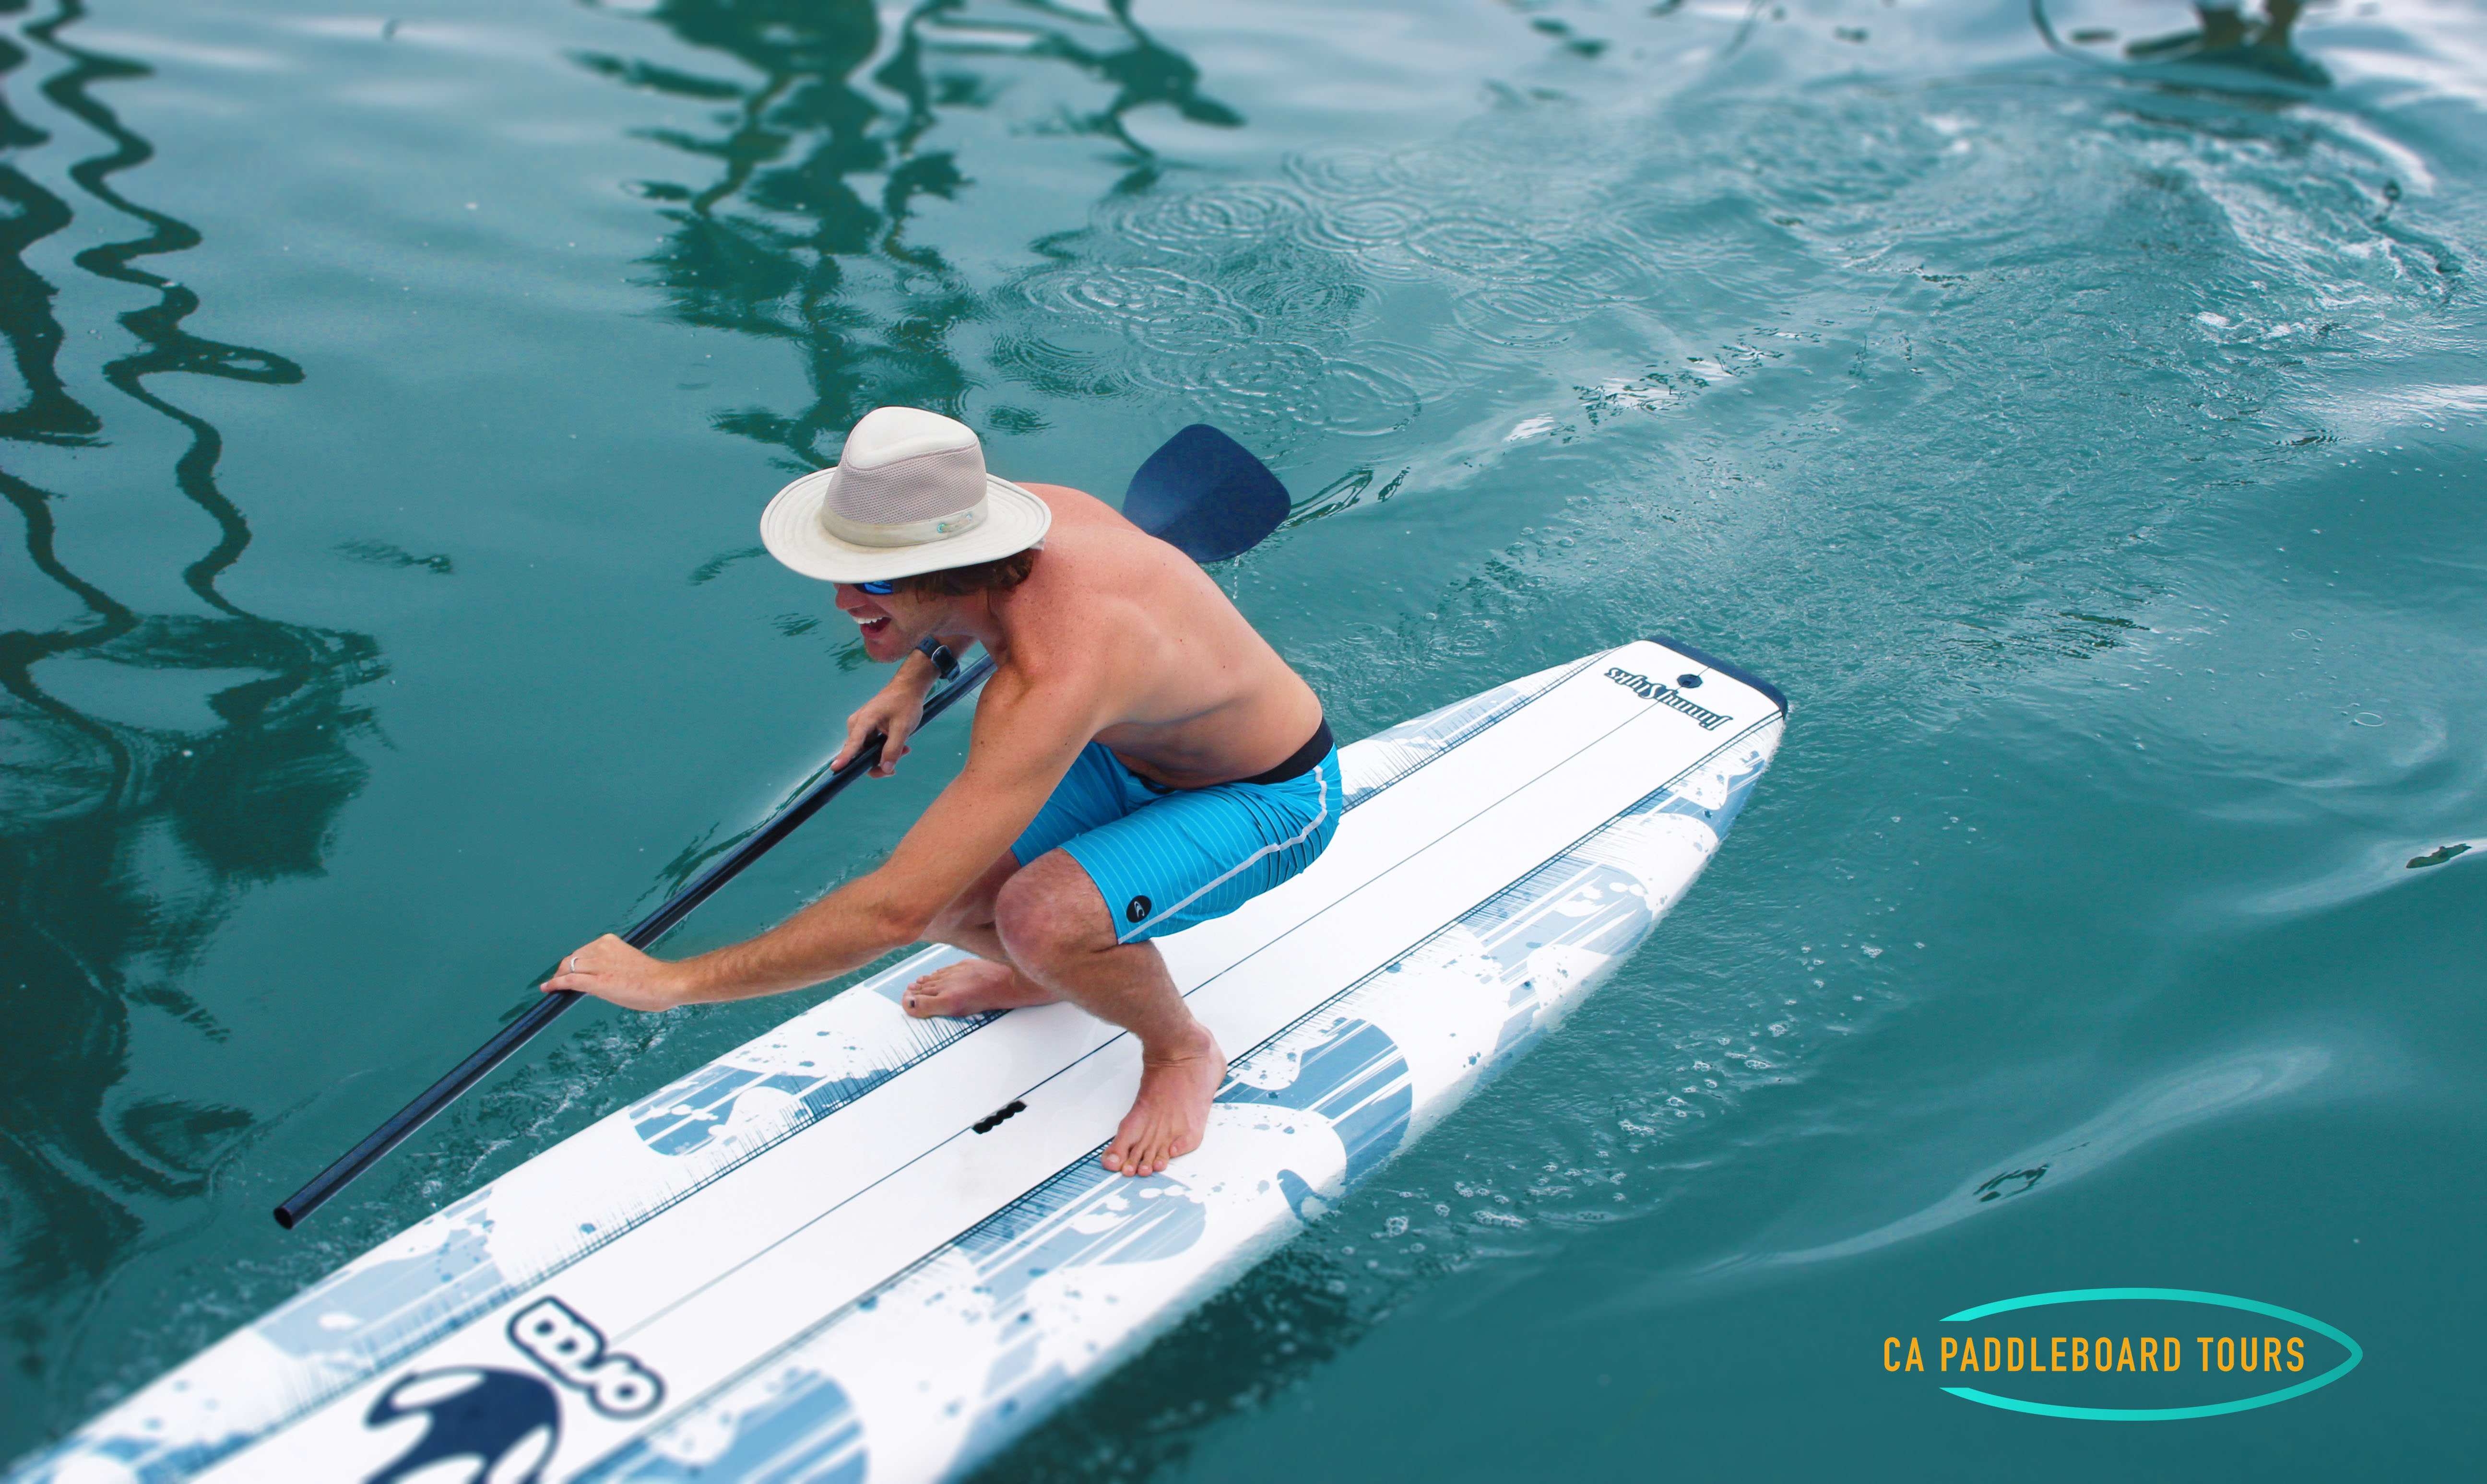 MAN SQUATTING ON PADDLEBOARD AS IT GLIDES IN BLUE WATER.